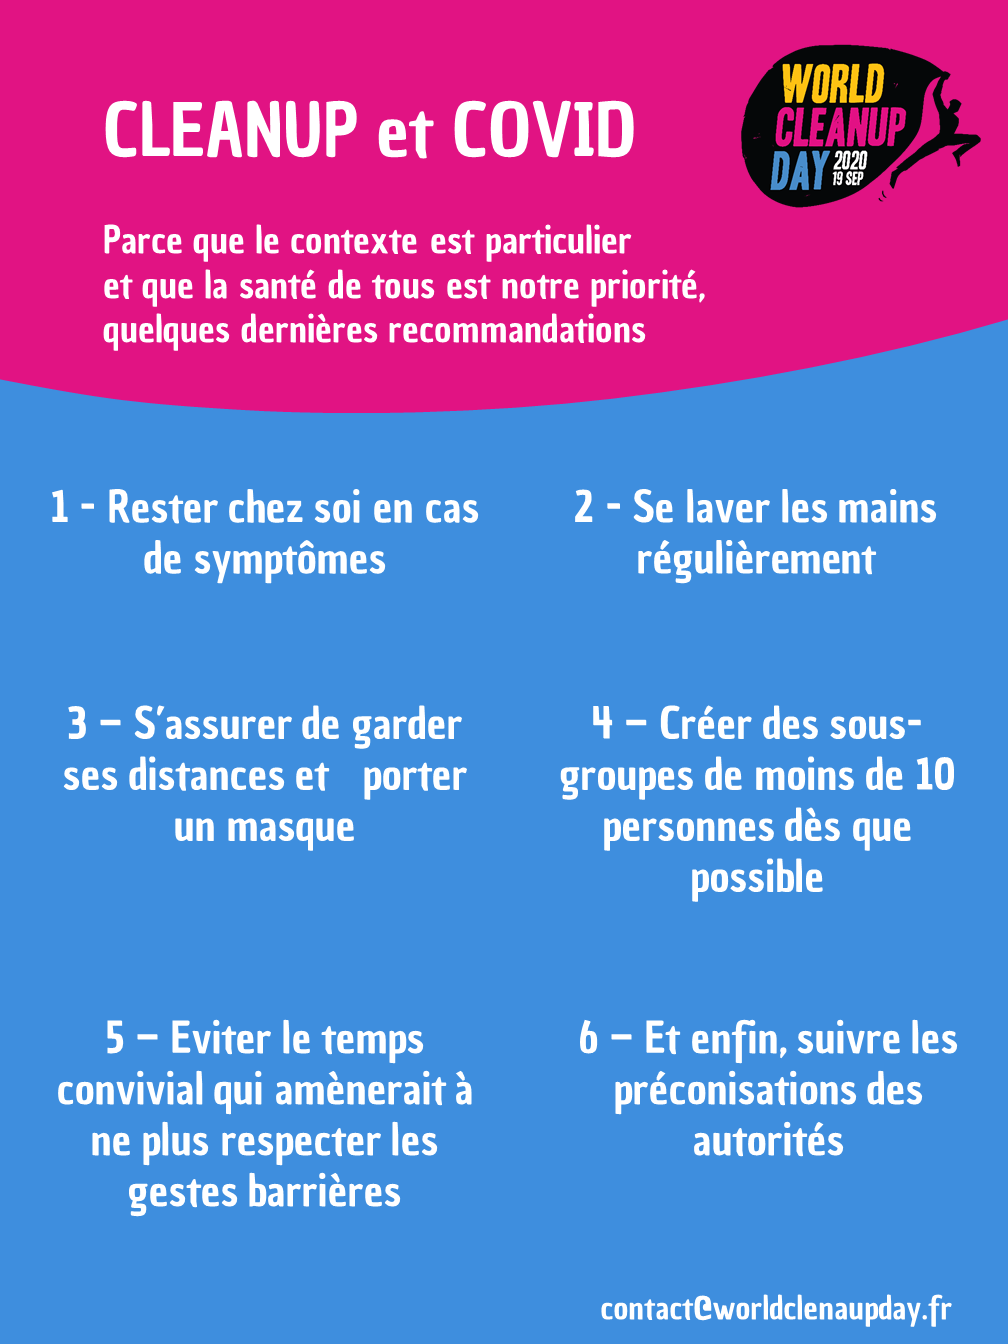 Fiche_CleanupCovid-V3.png (144 KB)